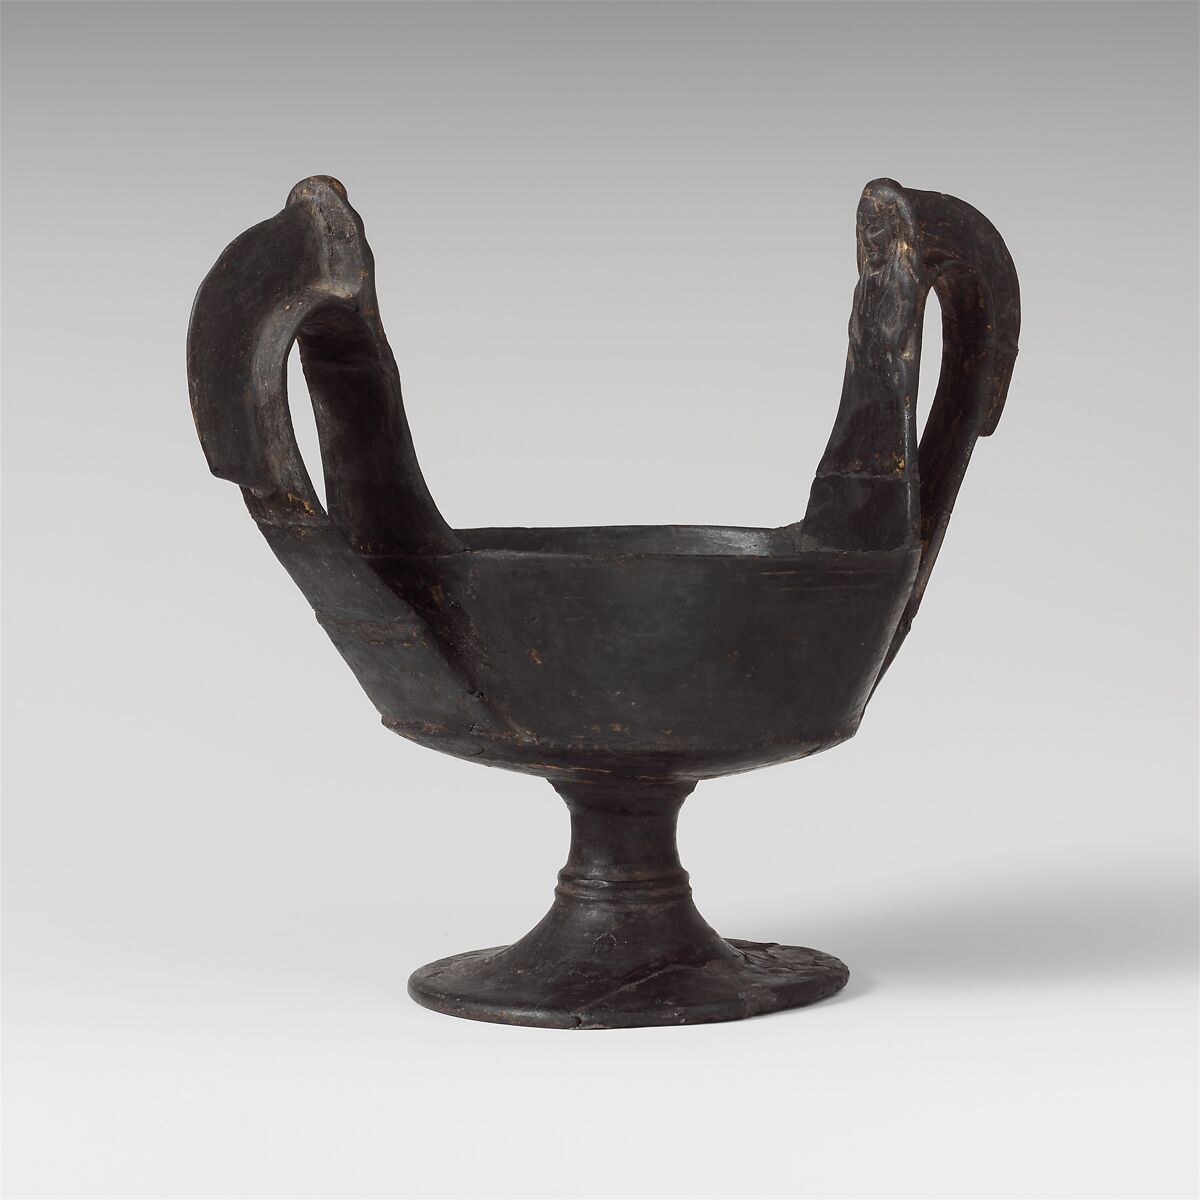 Terracotta kantharos (drinking cup with high handles), Terracotta, Etruscan 